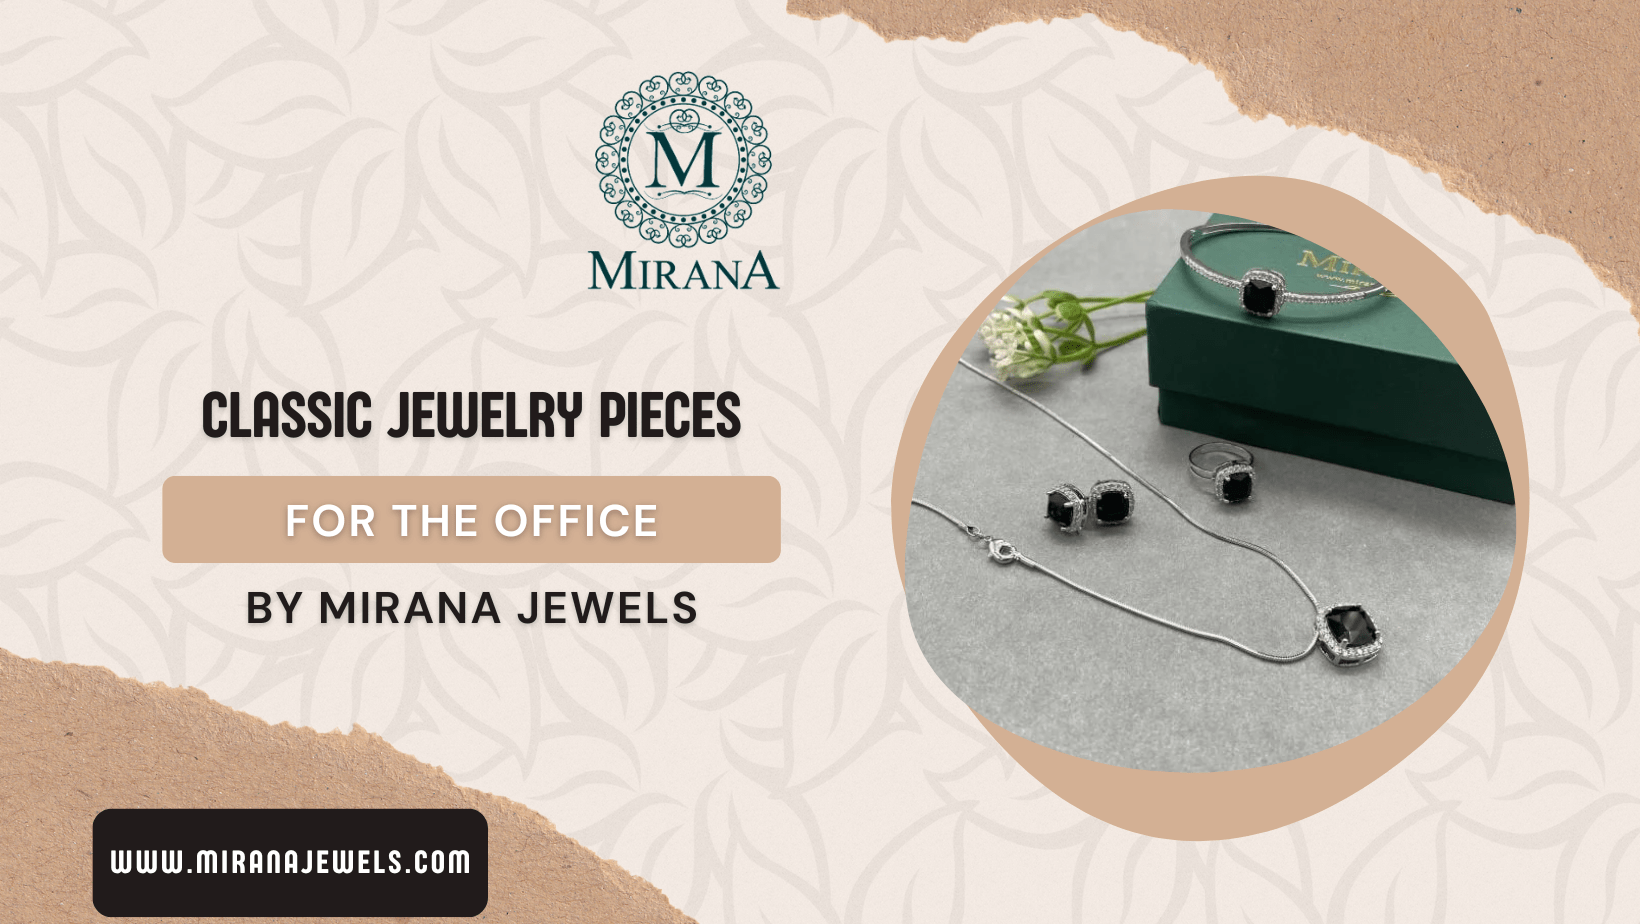 Classic Jewelry Pieces for the Office By Mirana Jewels